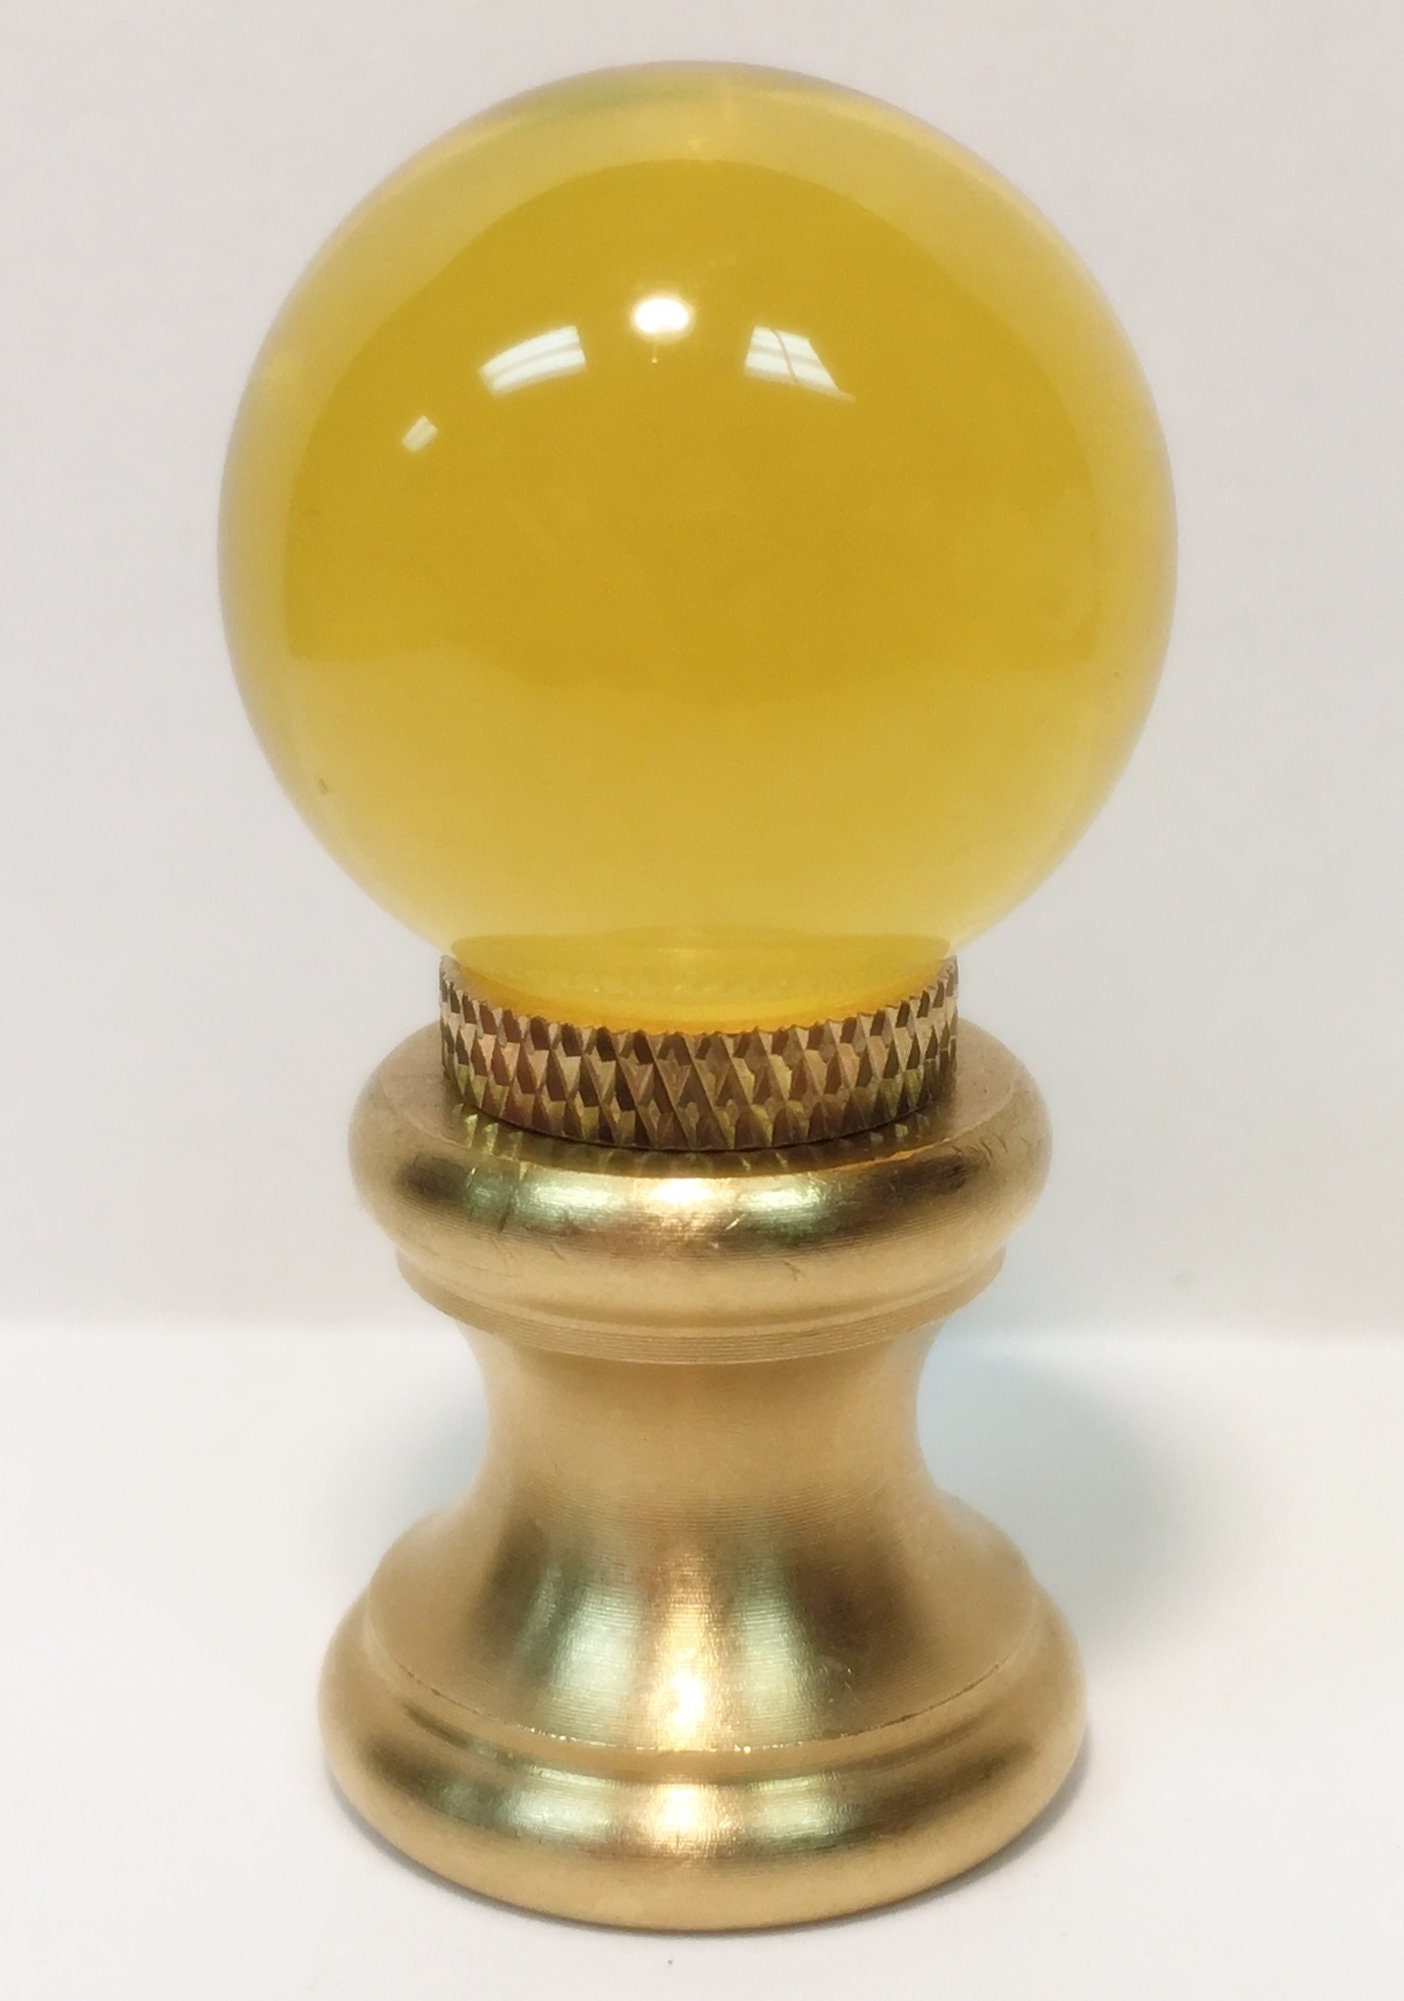 Details about   Lamp Finial-Large AQUA GLASS ORB-Brass Base-Choice of 3 Finishes AB,CH or PB 